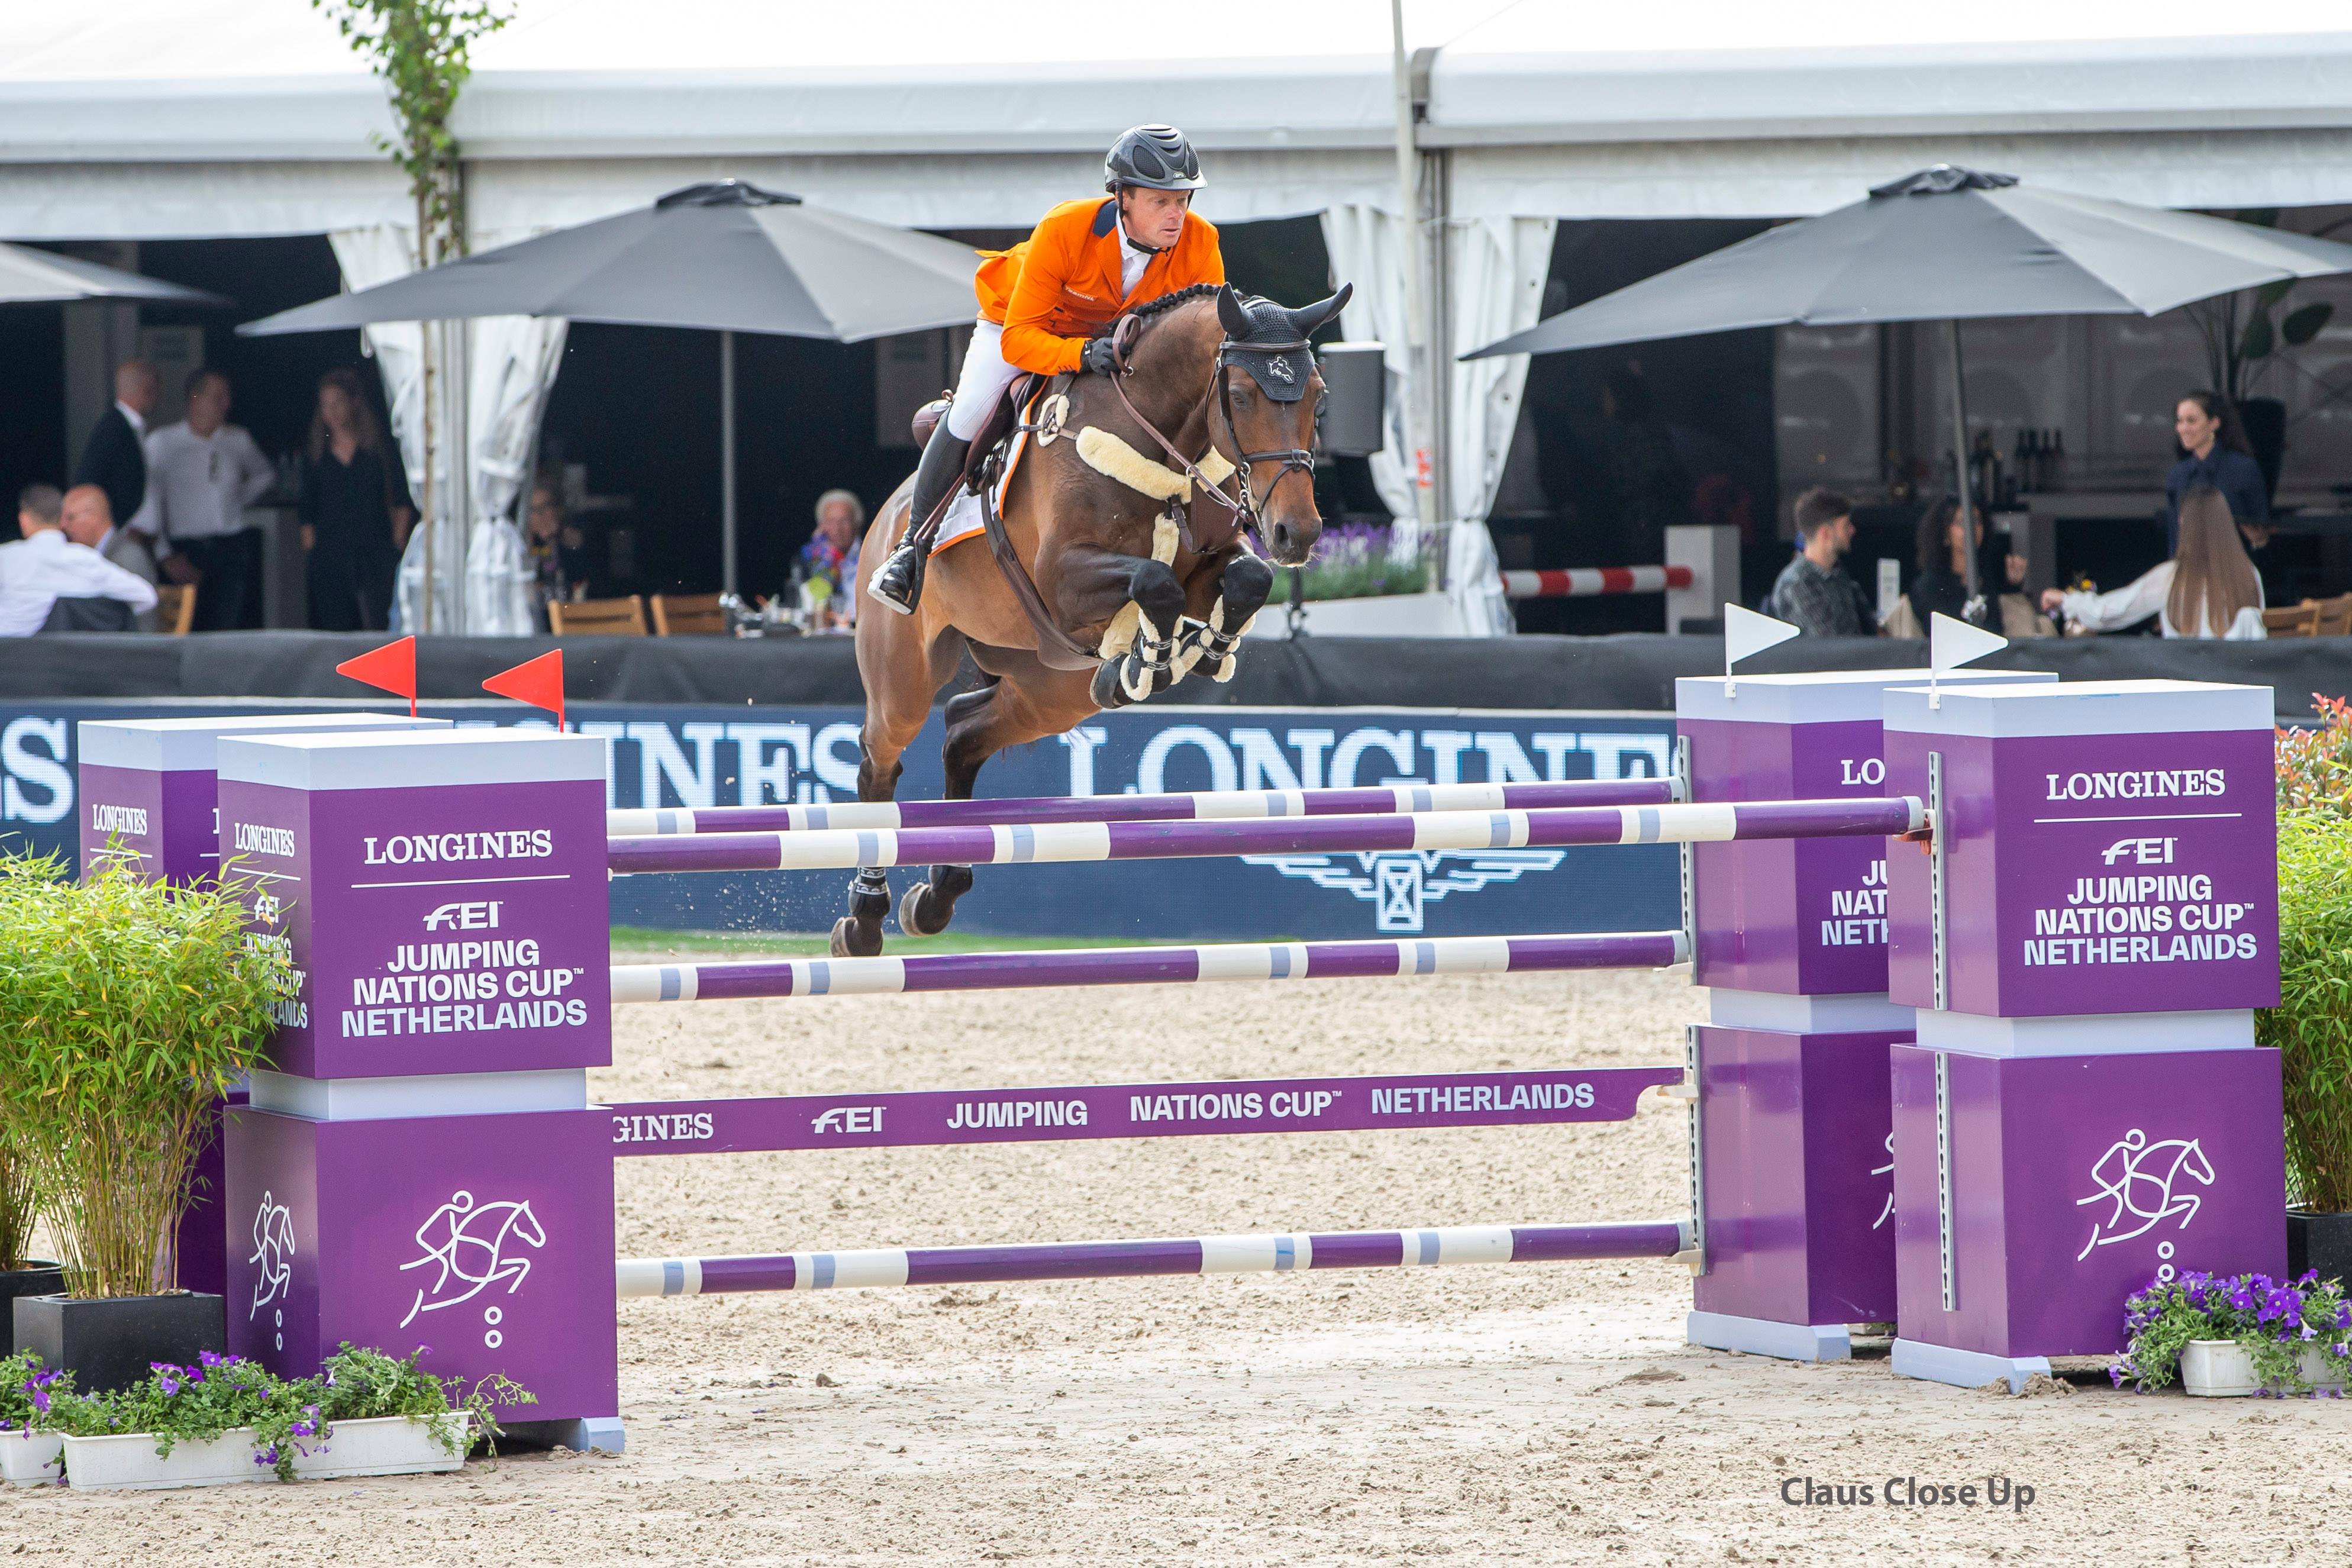 The Netherlands wins the Nation Cup in Rotterdam